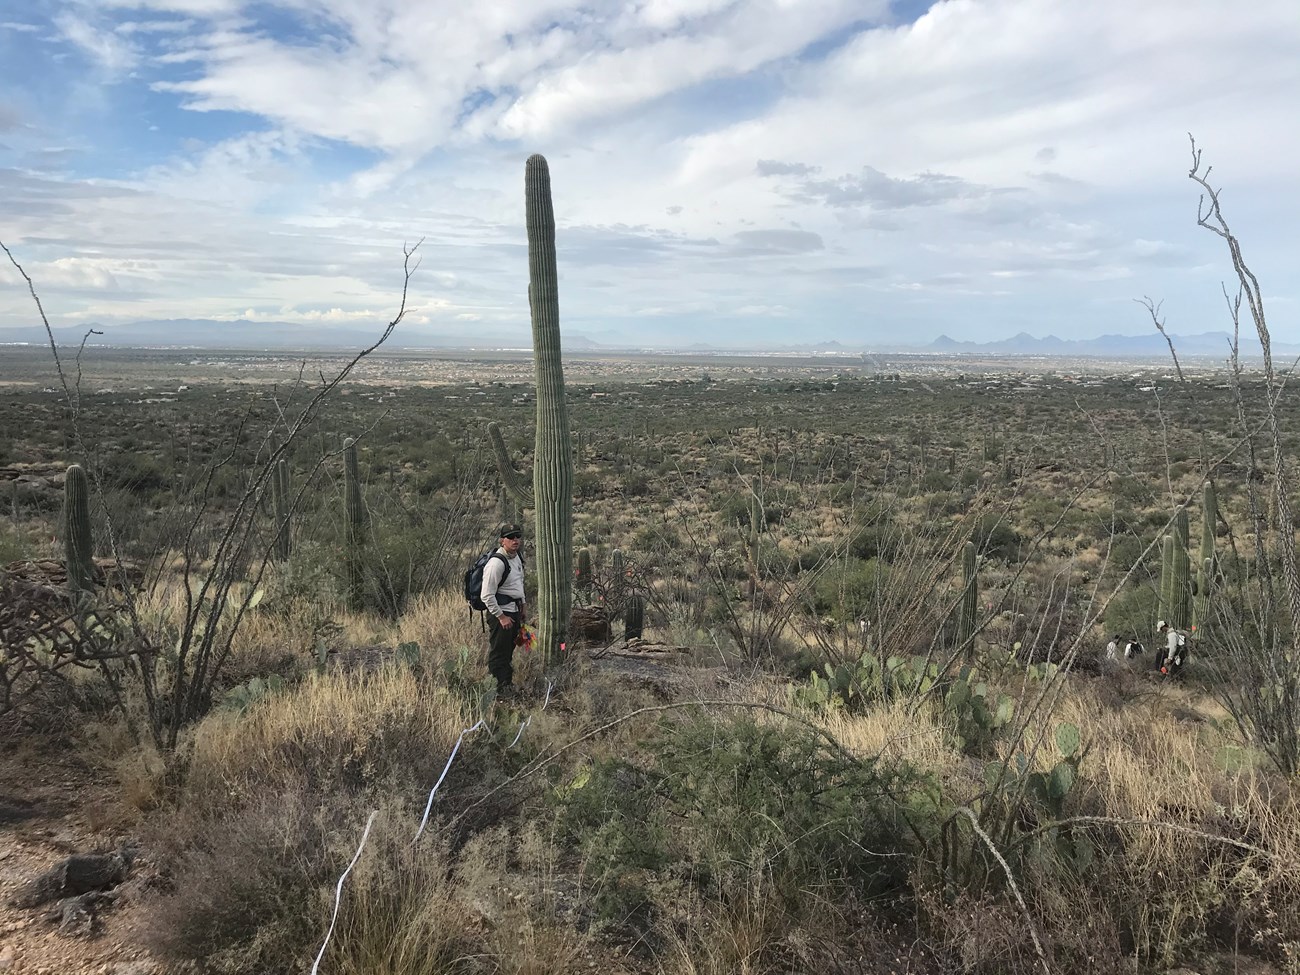 Scenic view of the plot and a man standing next to a tall saguaro